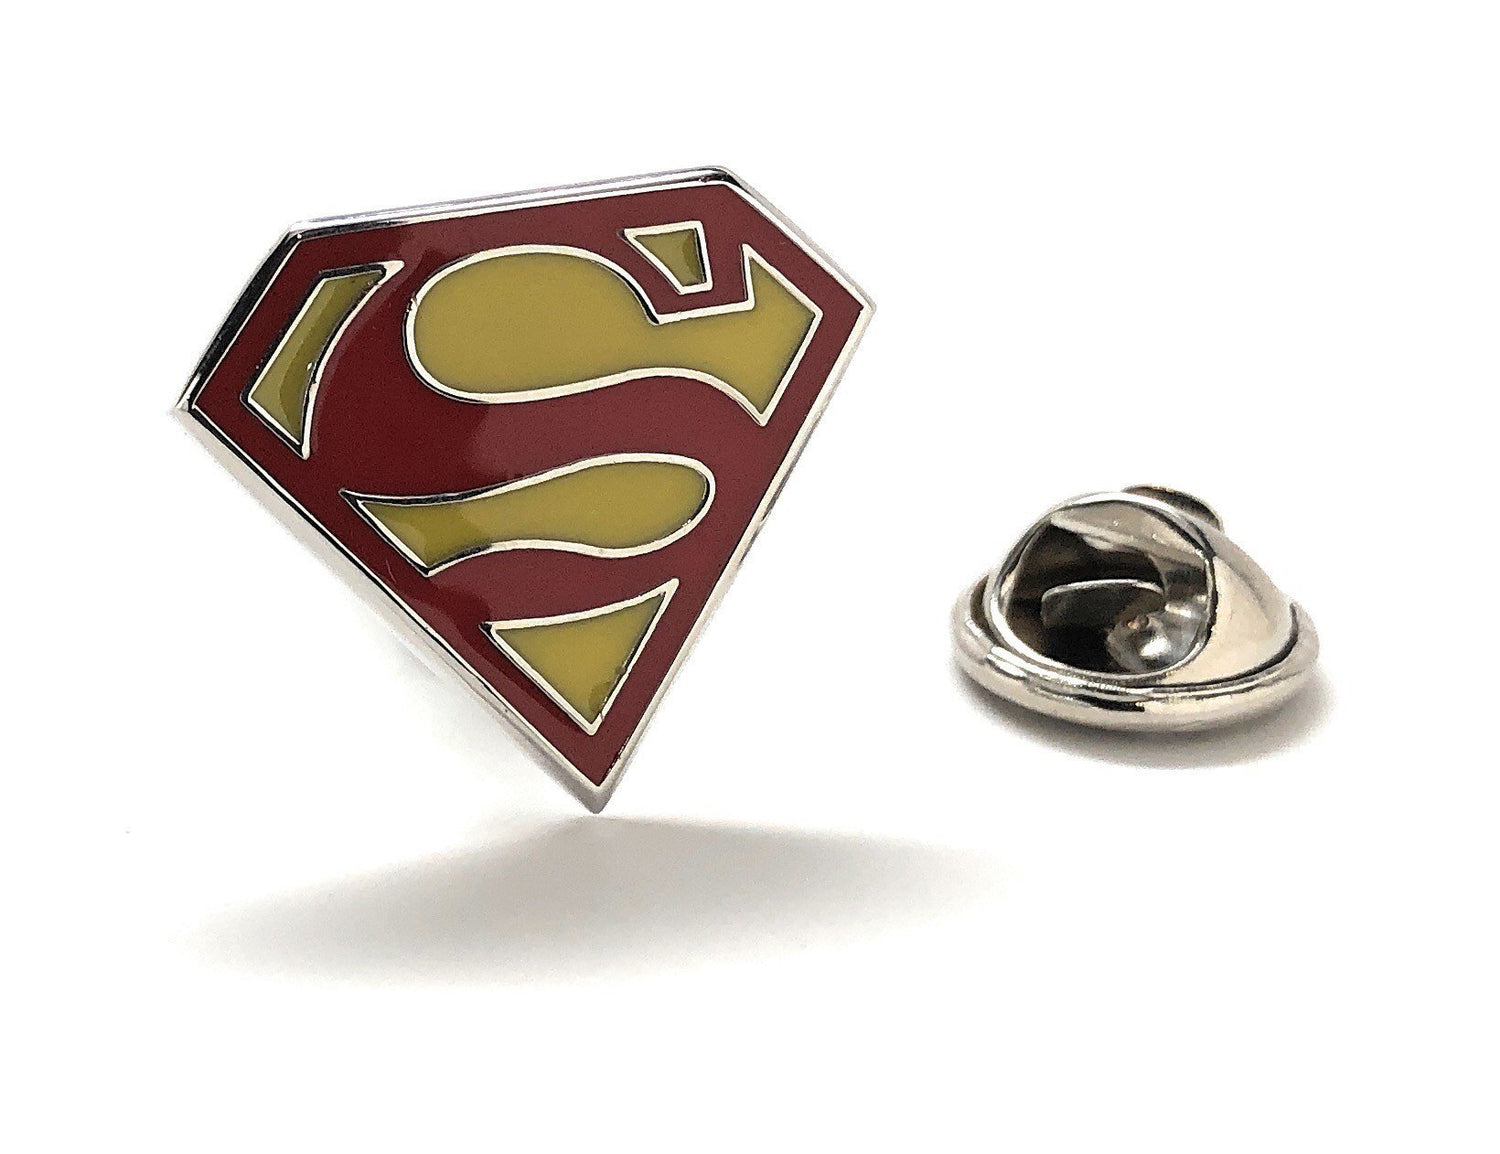 Red and Yellow Superman Lapel Pin - SHOPWITHSTYLE